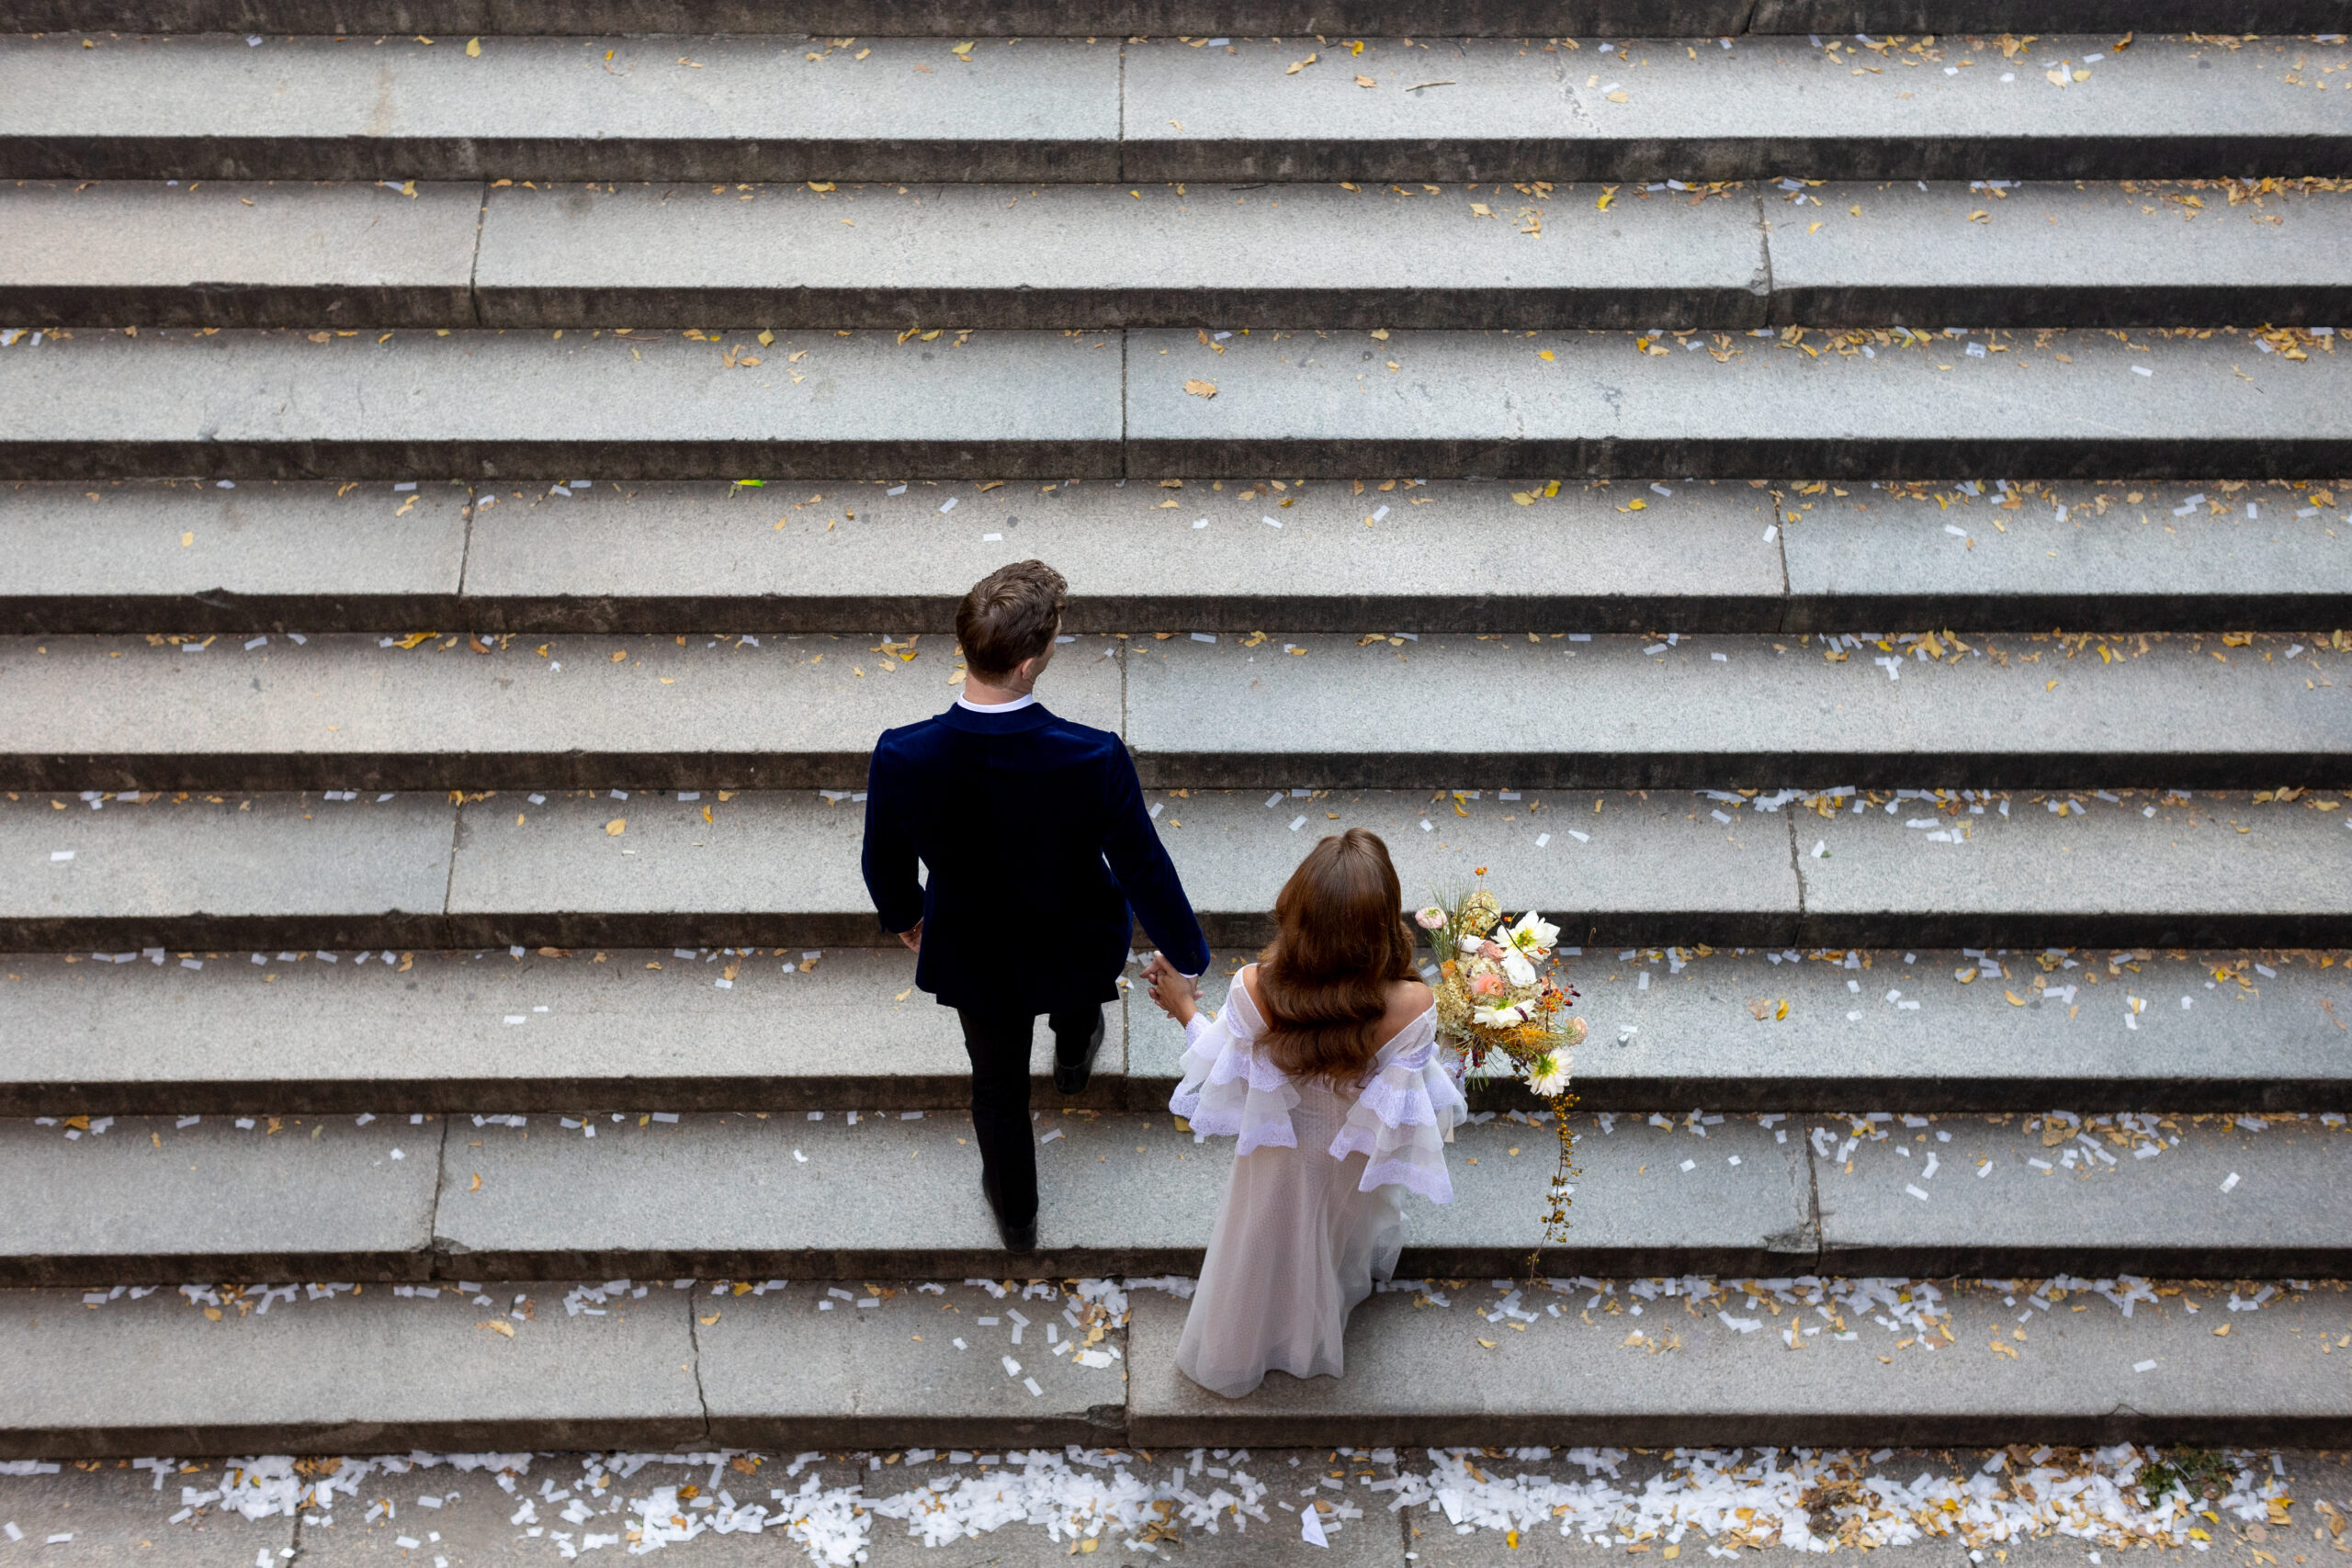 A wedding couple on the steps at Central Park, New York City